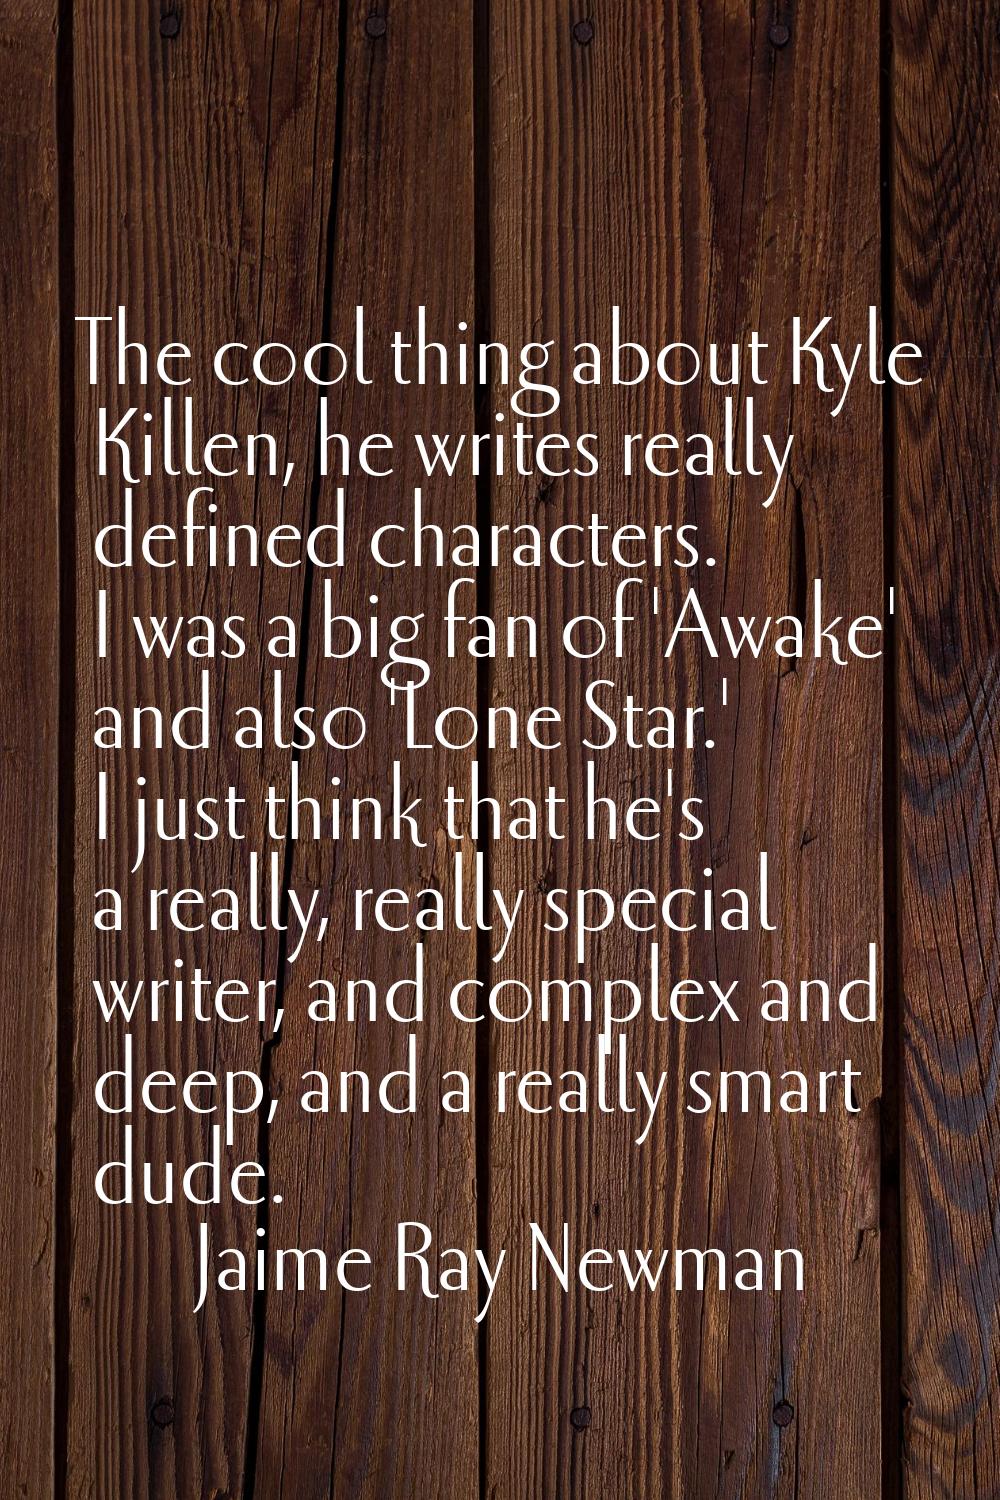 The cool thing about Kyle Killen, he writes really defined characters. I was a big fan of 'Awake' a